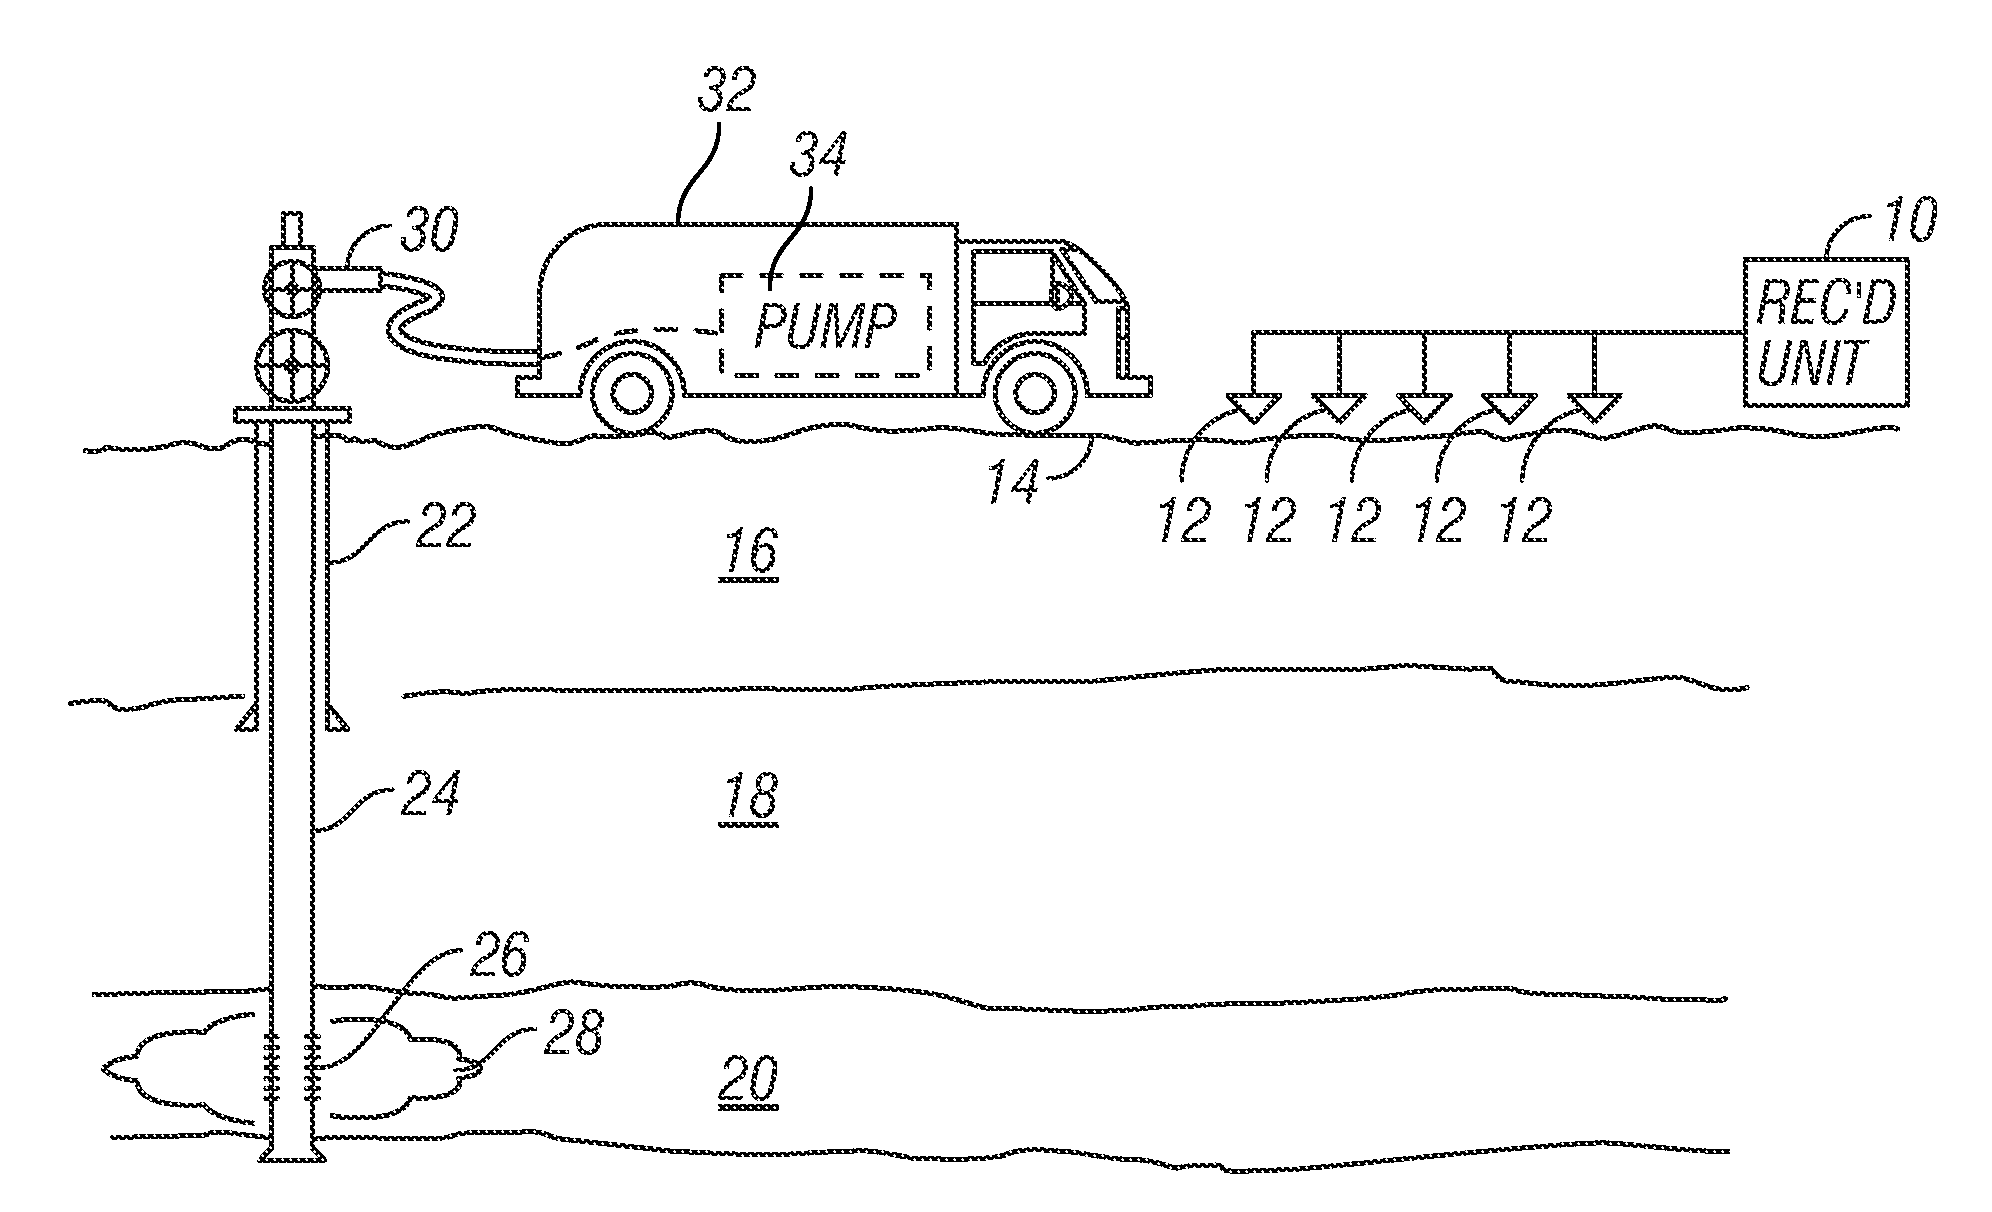 Method for calculating spatial and temporal distribution of the gutenberg-richter parameter for induced subsurface seismic events and its application to evaluation of subsurface formations